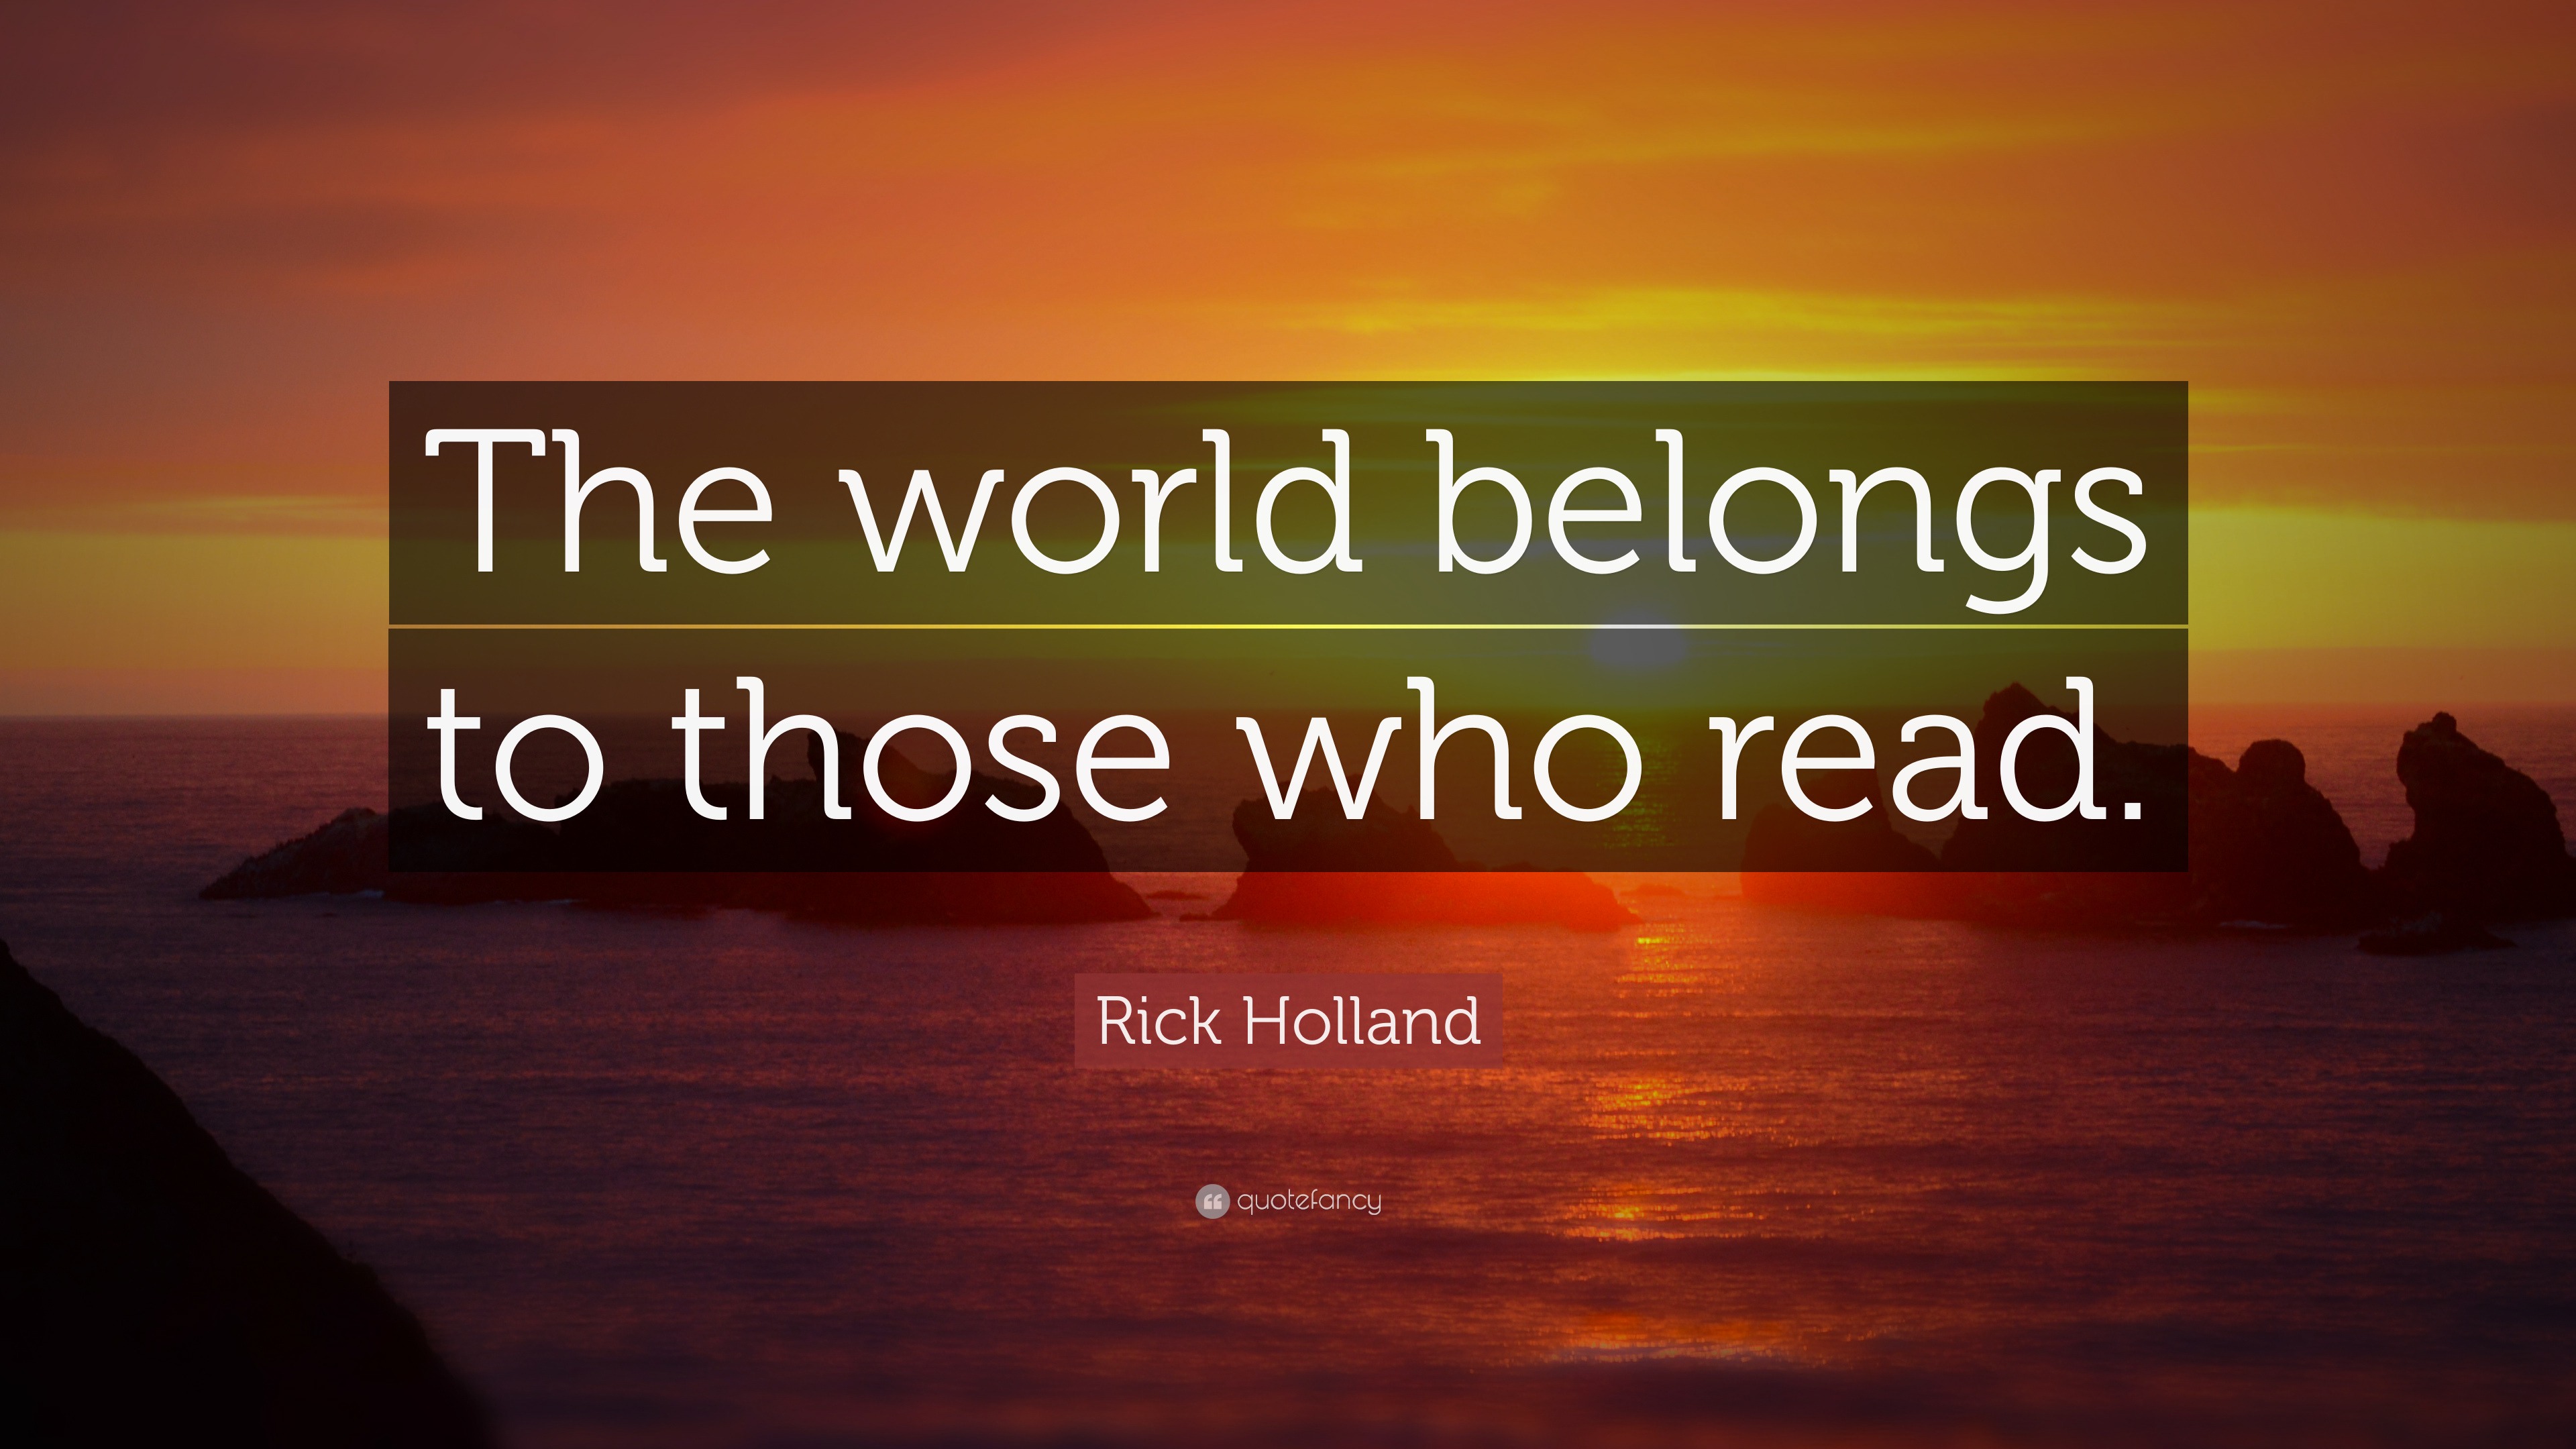 Rick Holland Quote: “The world belongs to those who read.”